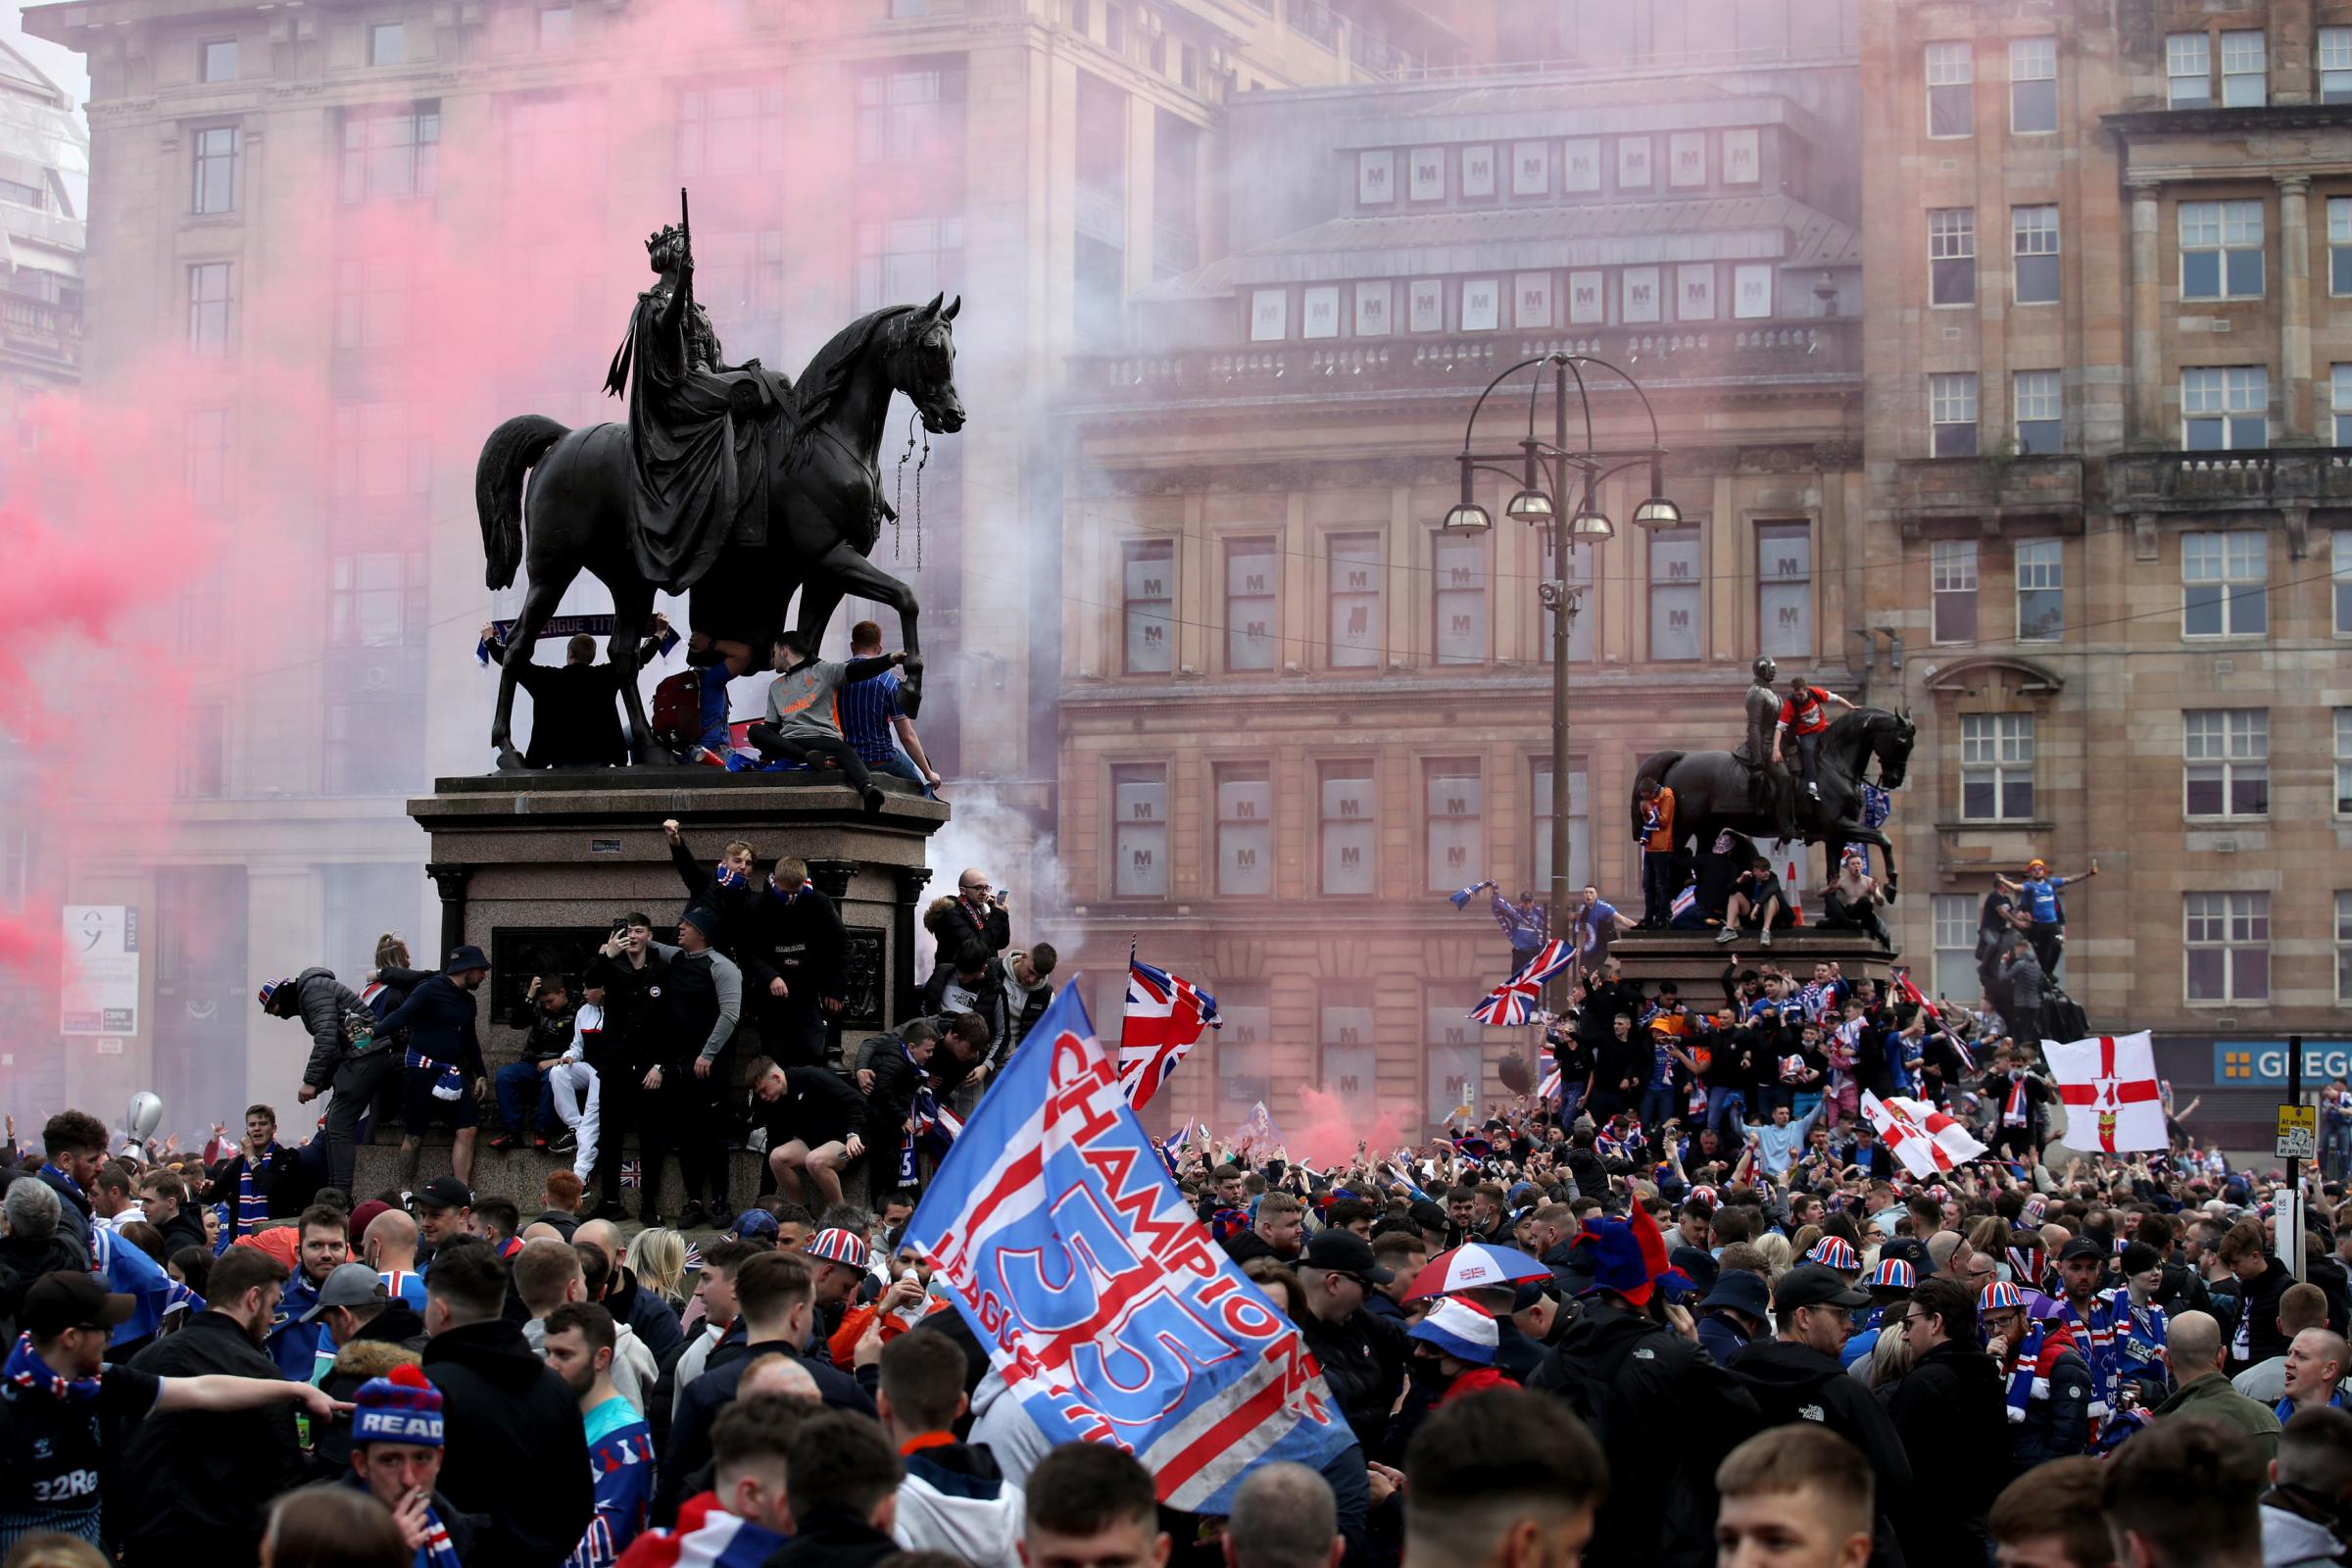 Glasgow George Square Rangers riot: Man arrested as total reaches 45